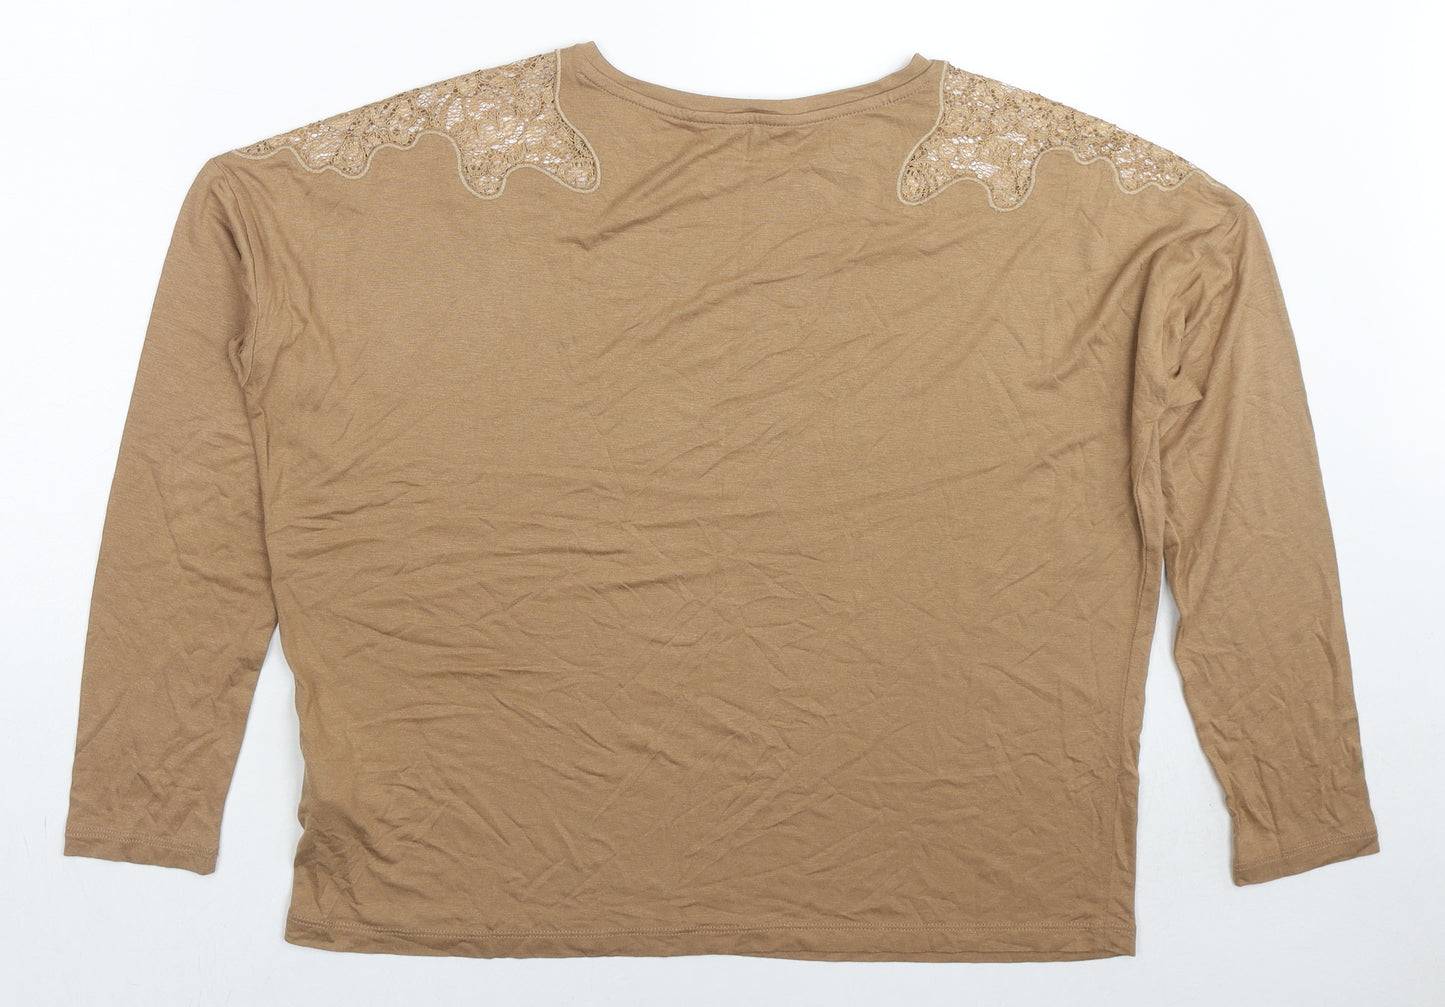 Marks and Spencer Womens Brown Viscose Basic T-Shirt Size 14 Round Neck - Lace Detail